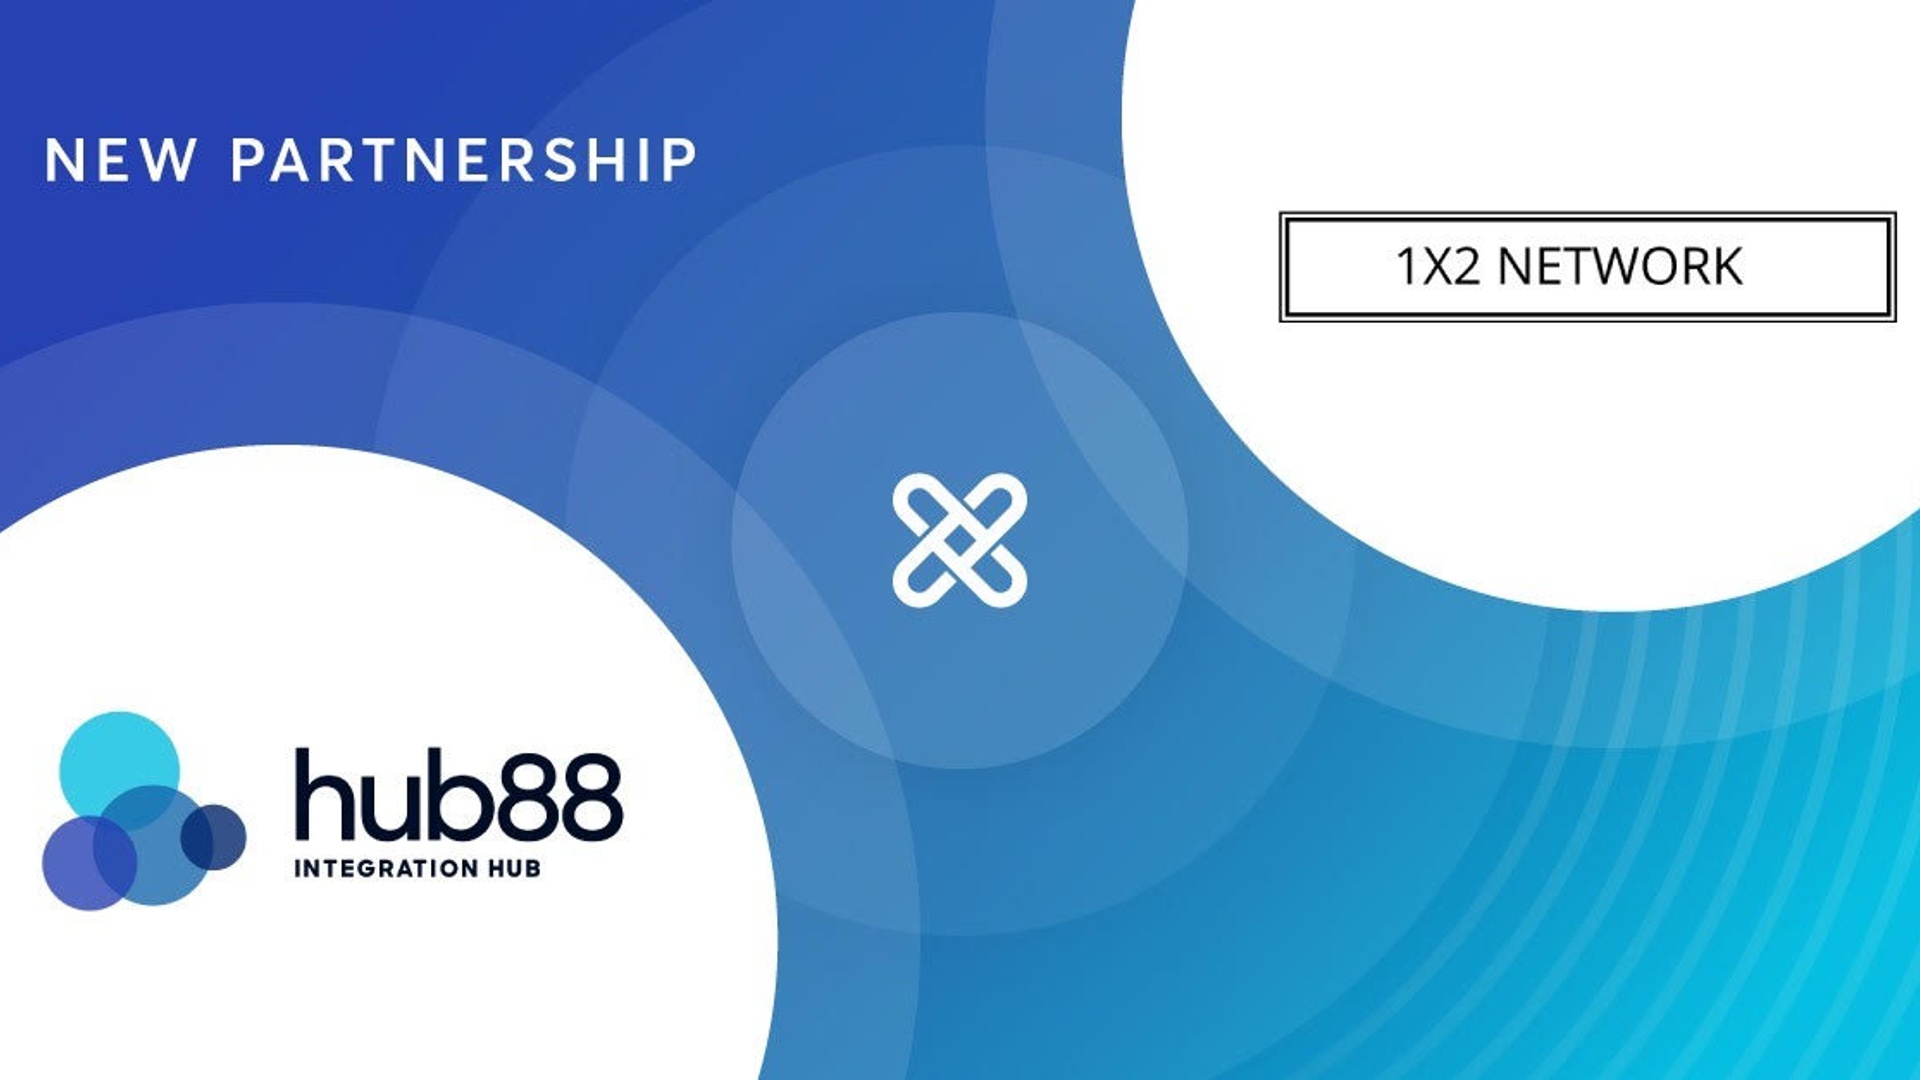 Cover Image for Hub88 integrates leading content from 1X2 Network